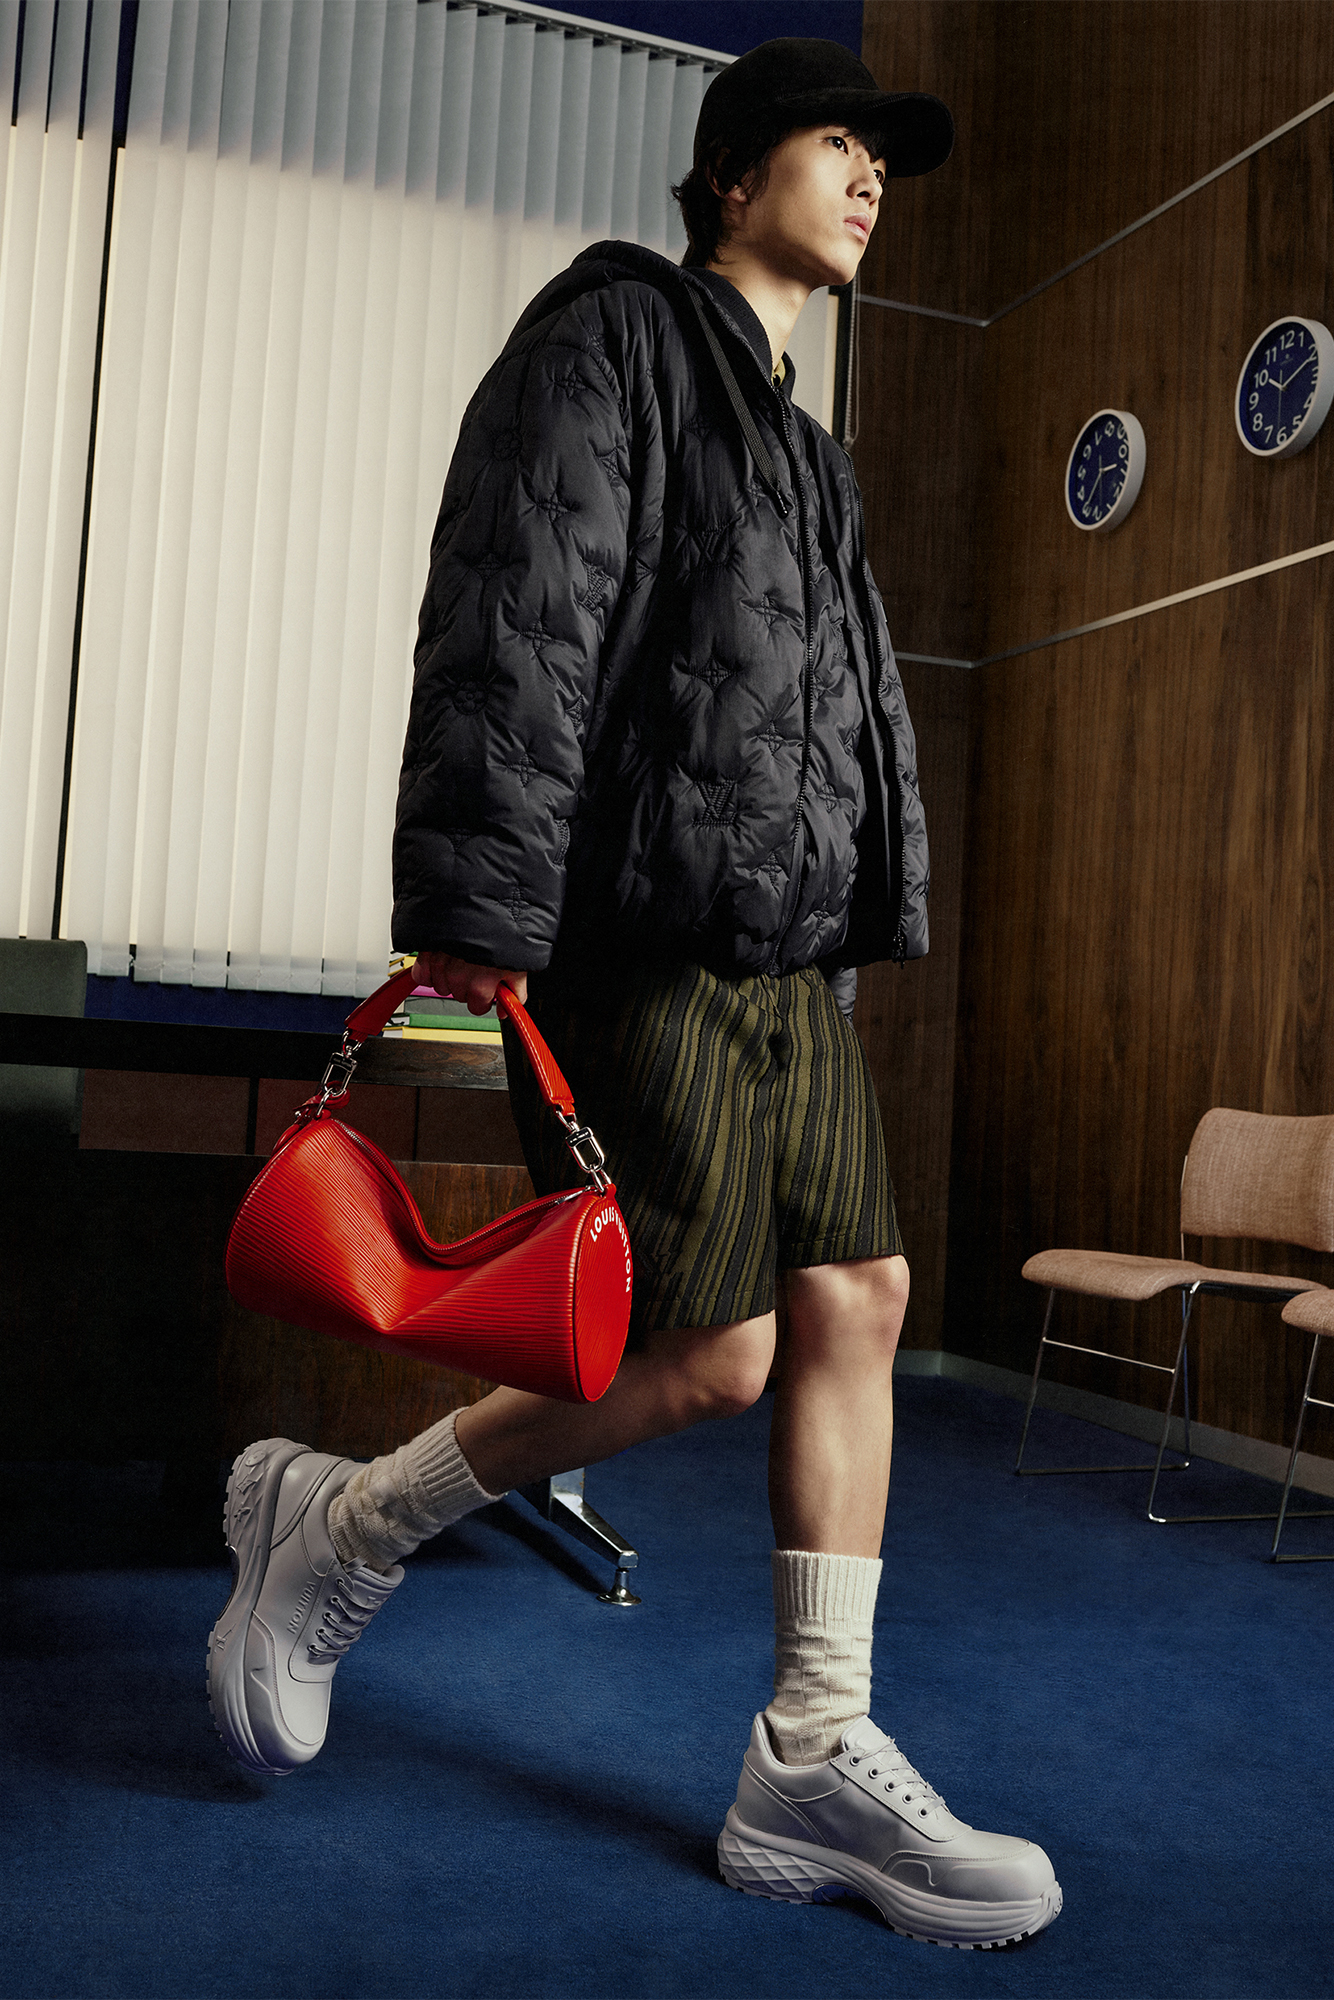 Model with black jacket and dark green shorts carrying a red bag for Louis Vuitton Studio Prêt-à-Porter Homme